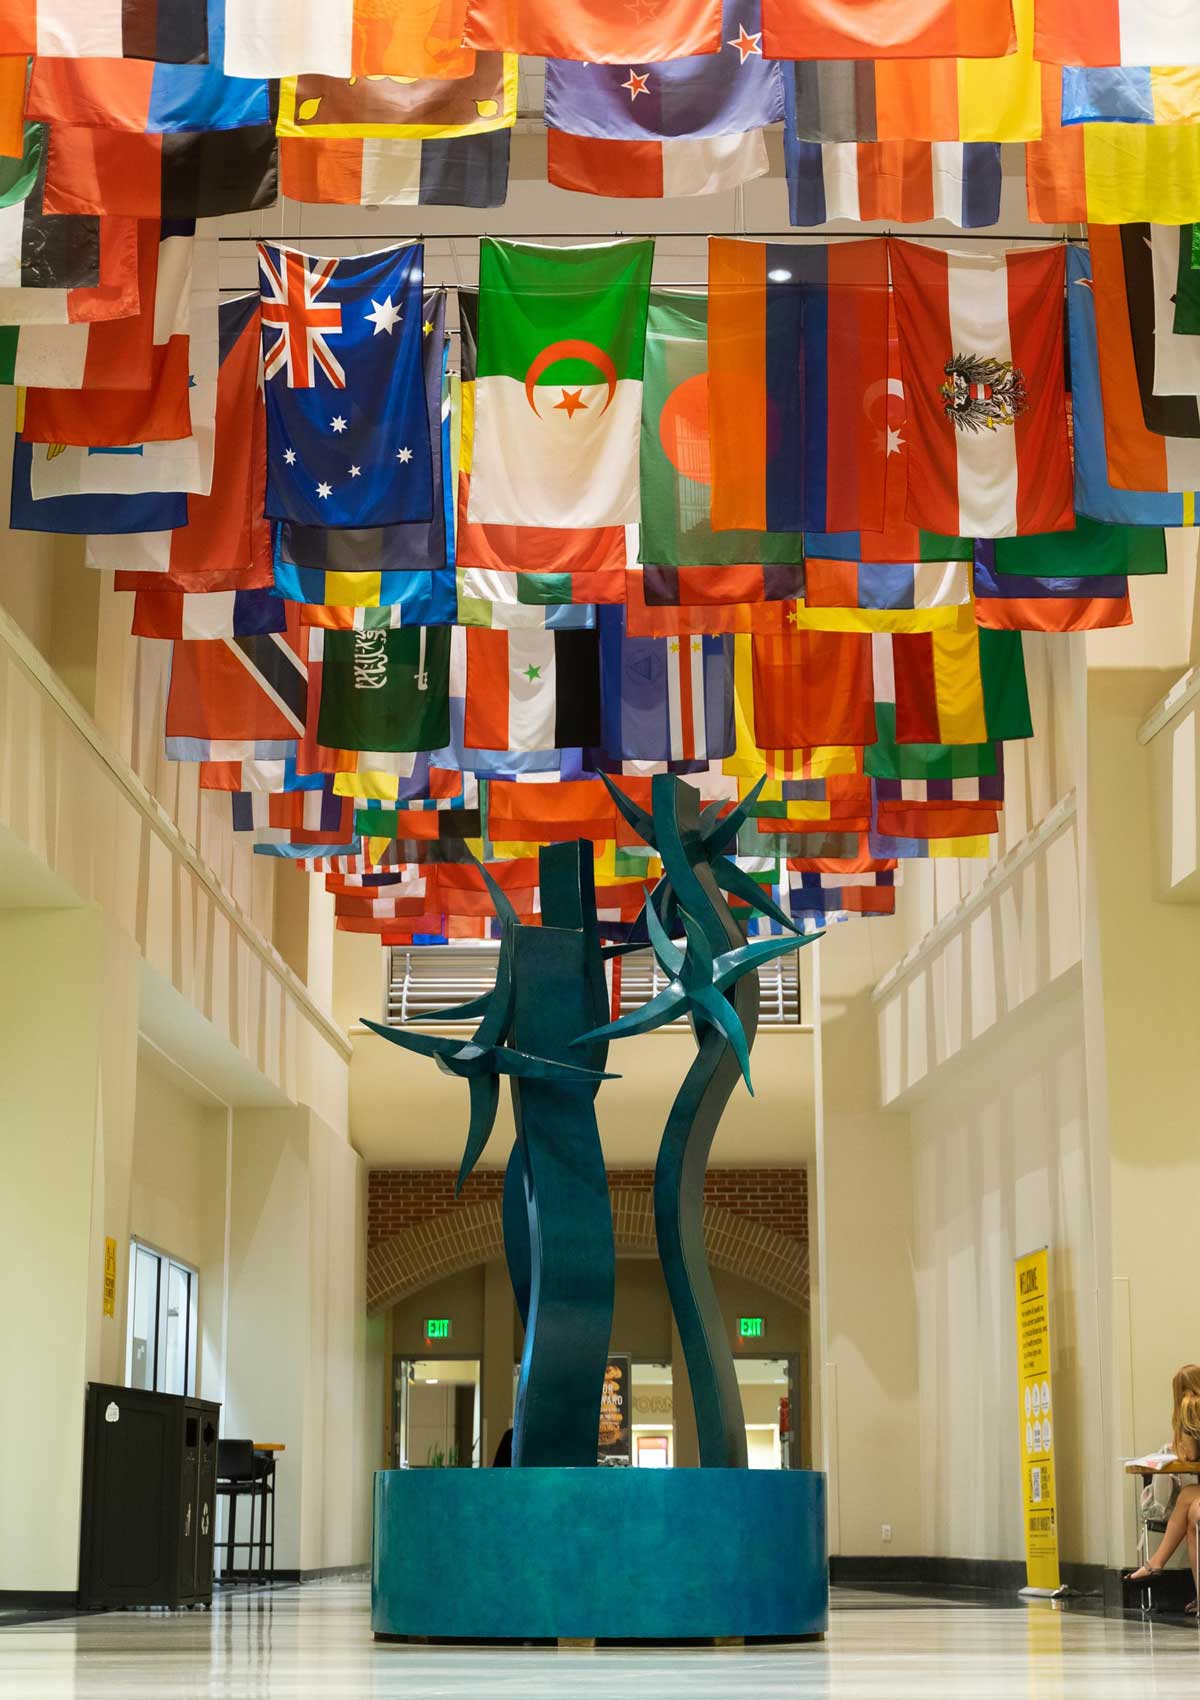 International flags in hallway of student union